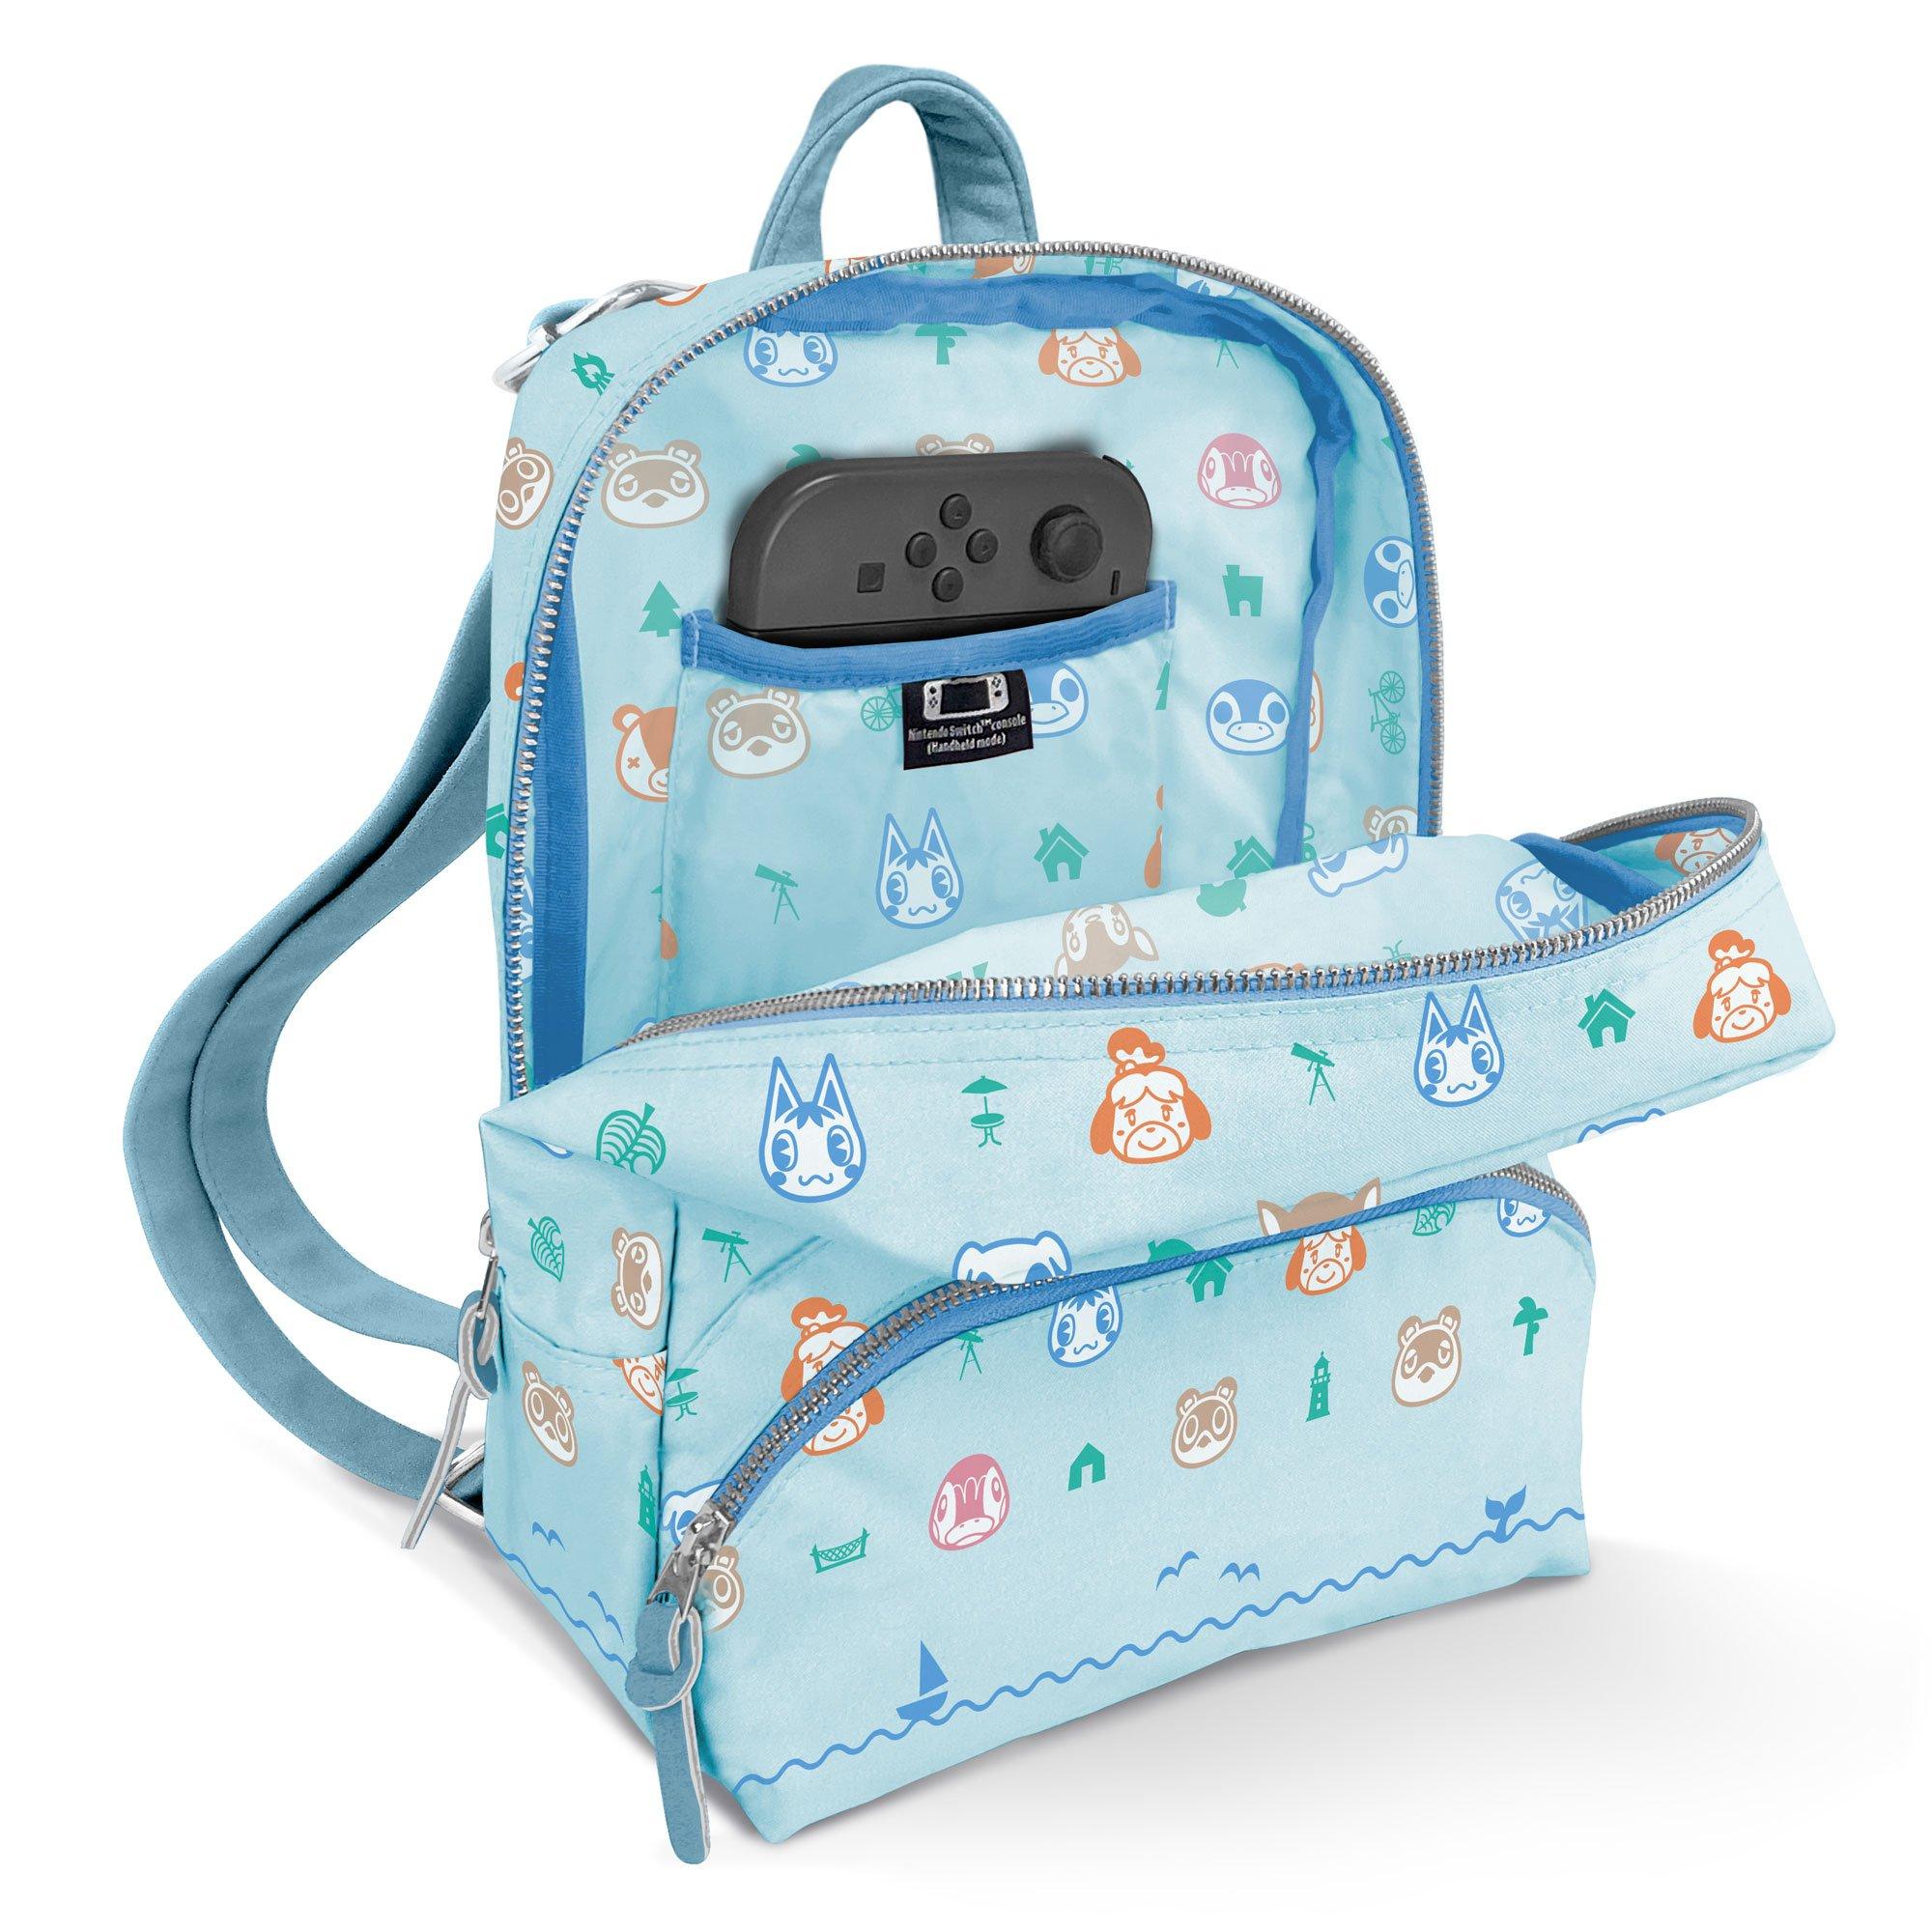 Razer Animal Crossing: New Horizons Outdoor Pattern Mini Backpack with Nintendo Switch Travel Pocket